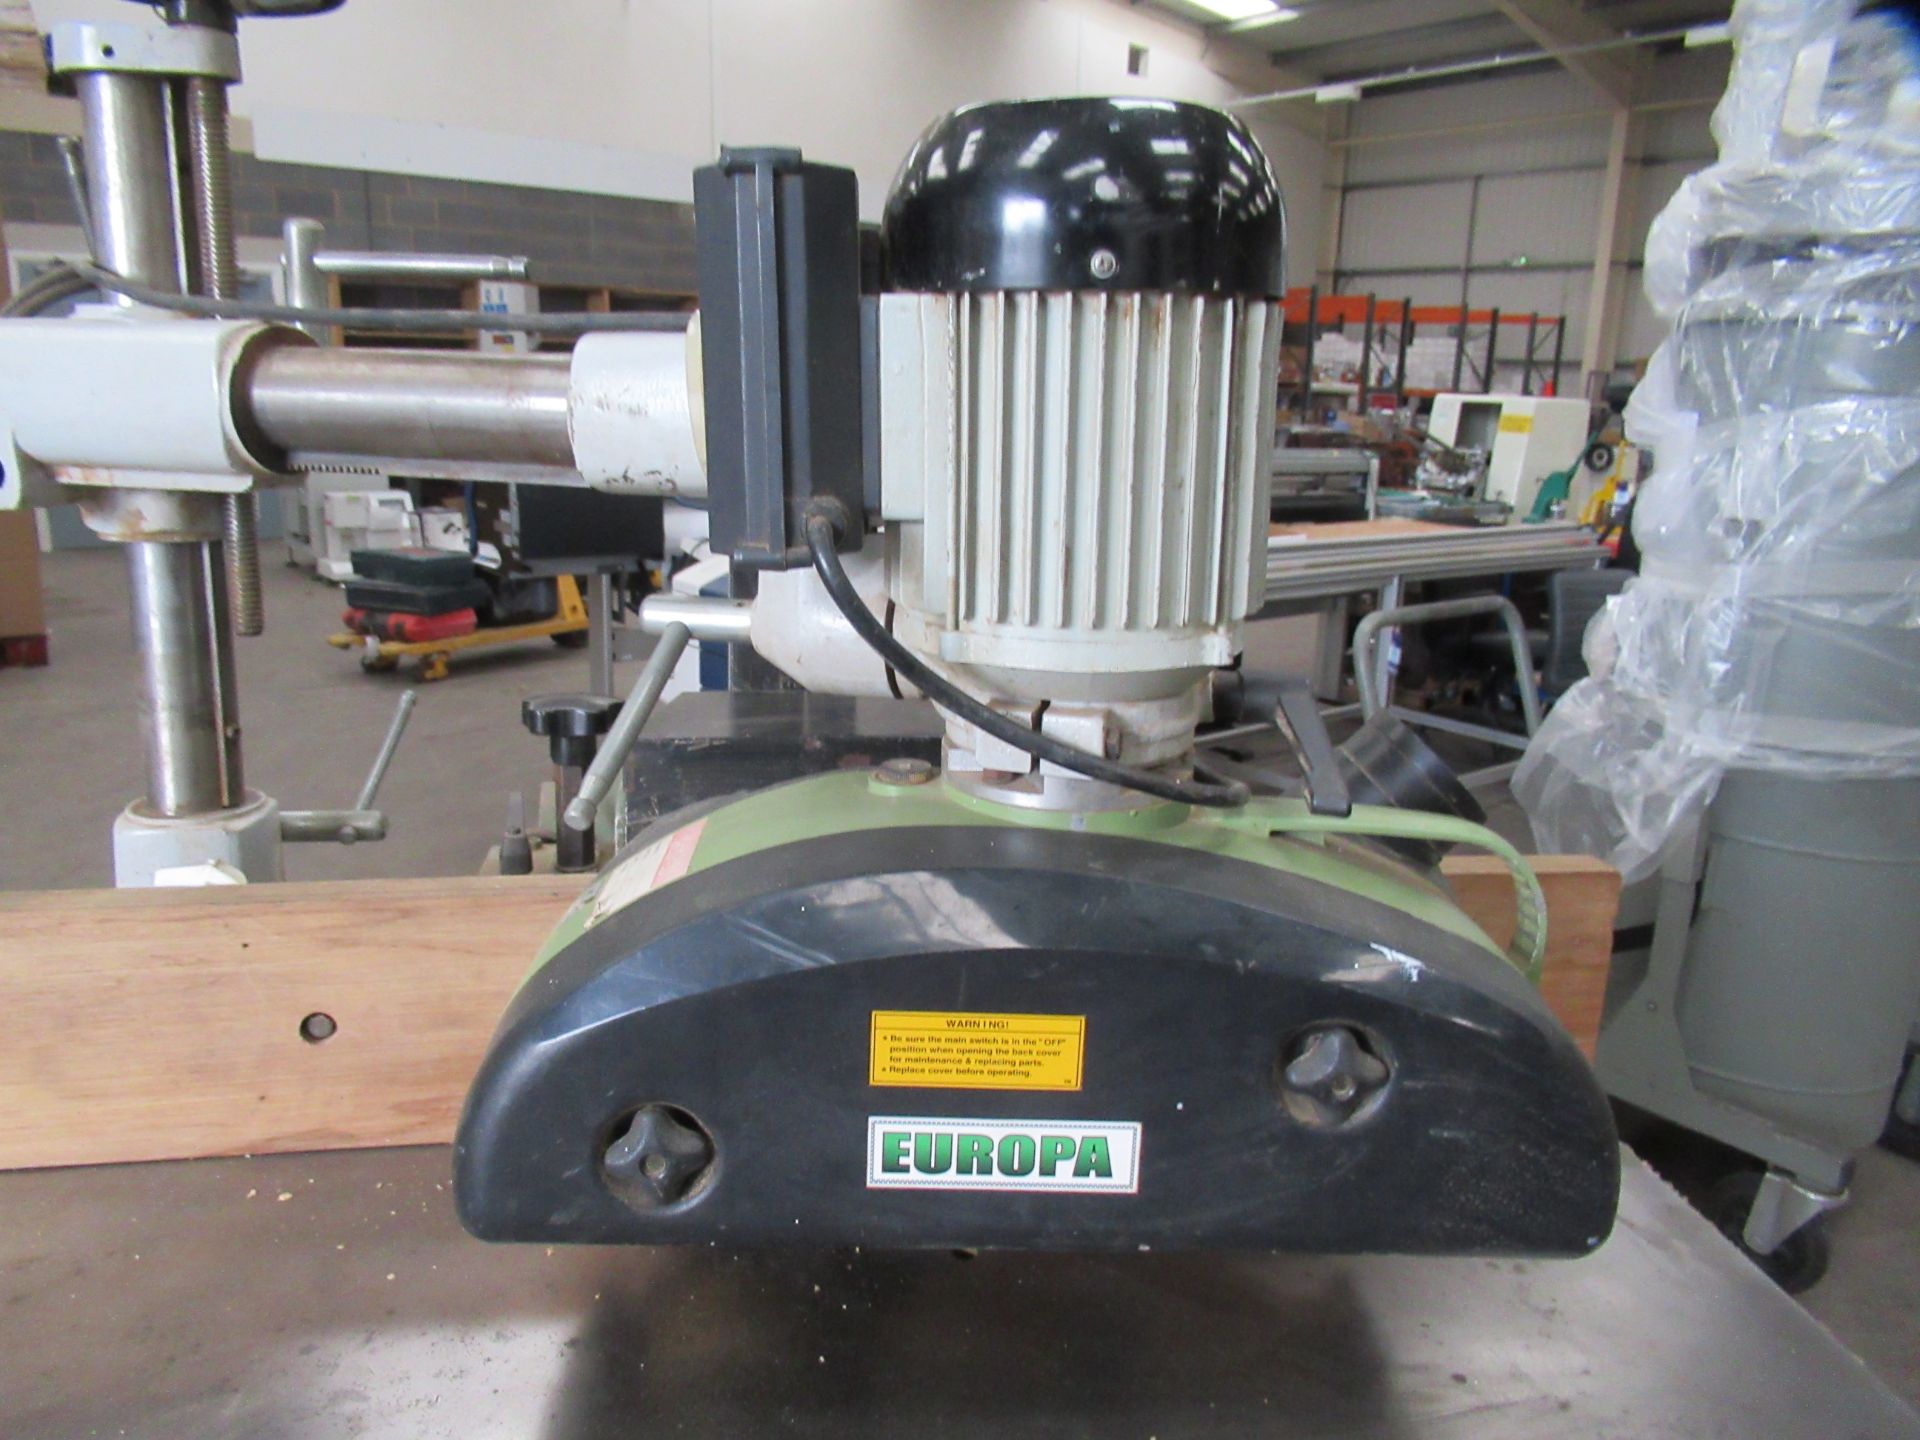 1 1/4" Spindle Moulder 4 Speed 4kW 415V with Powerd Roller Feed - Image 2 of 9